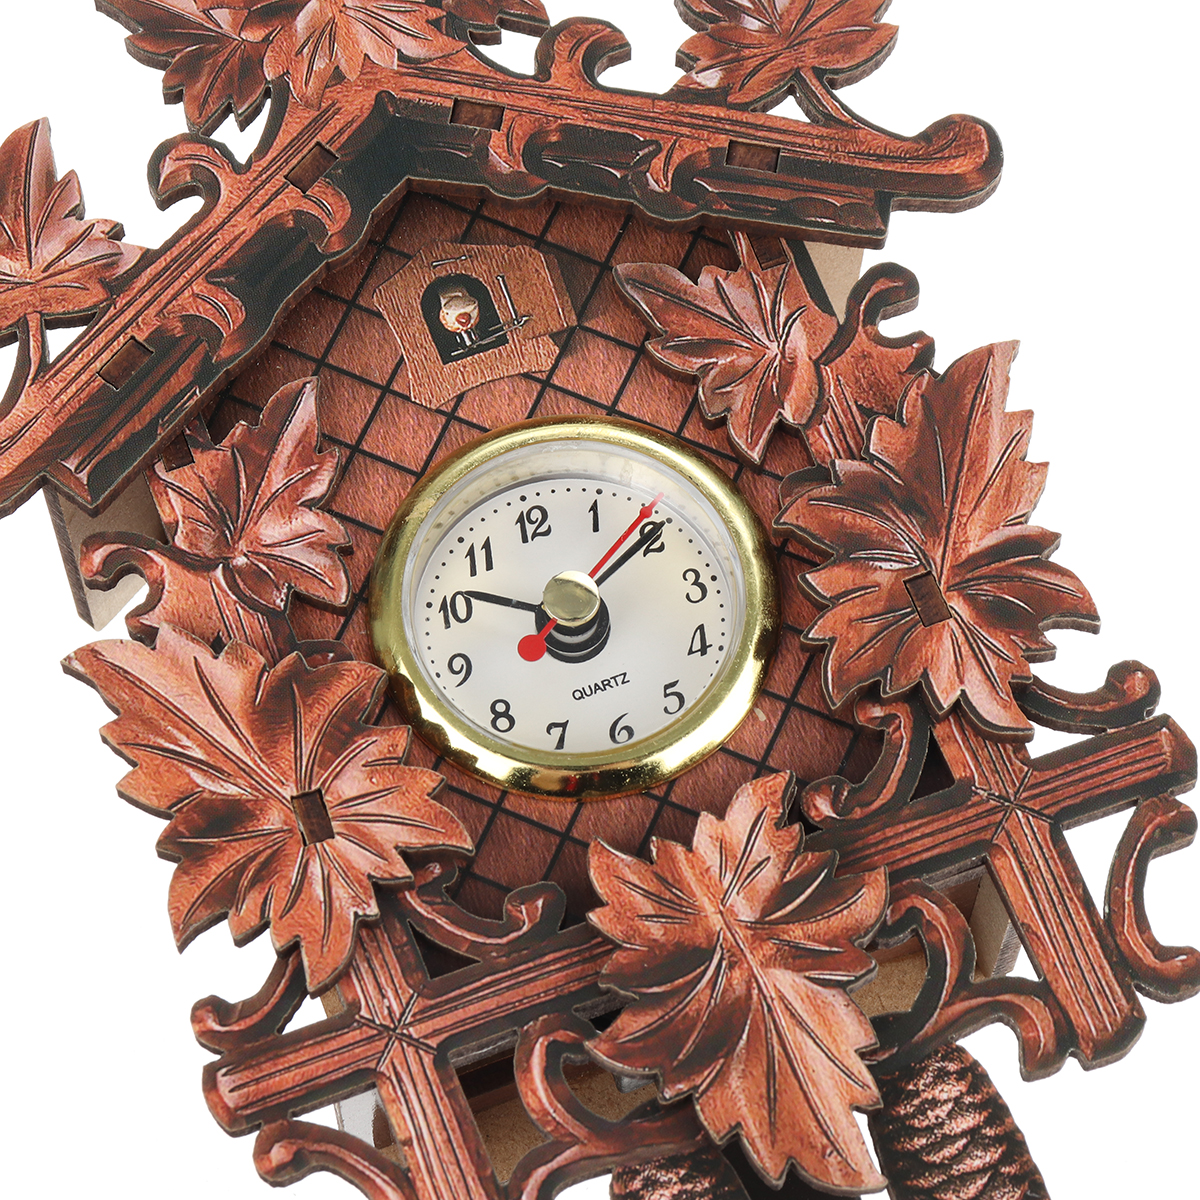 Find Wall Clocks Cuckoo Pendulum Watch Art Craft Home Decoration Hanging Wood Watches for Sale on Gipsybee.com with cryptocurrencies